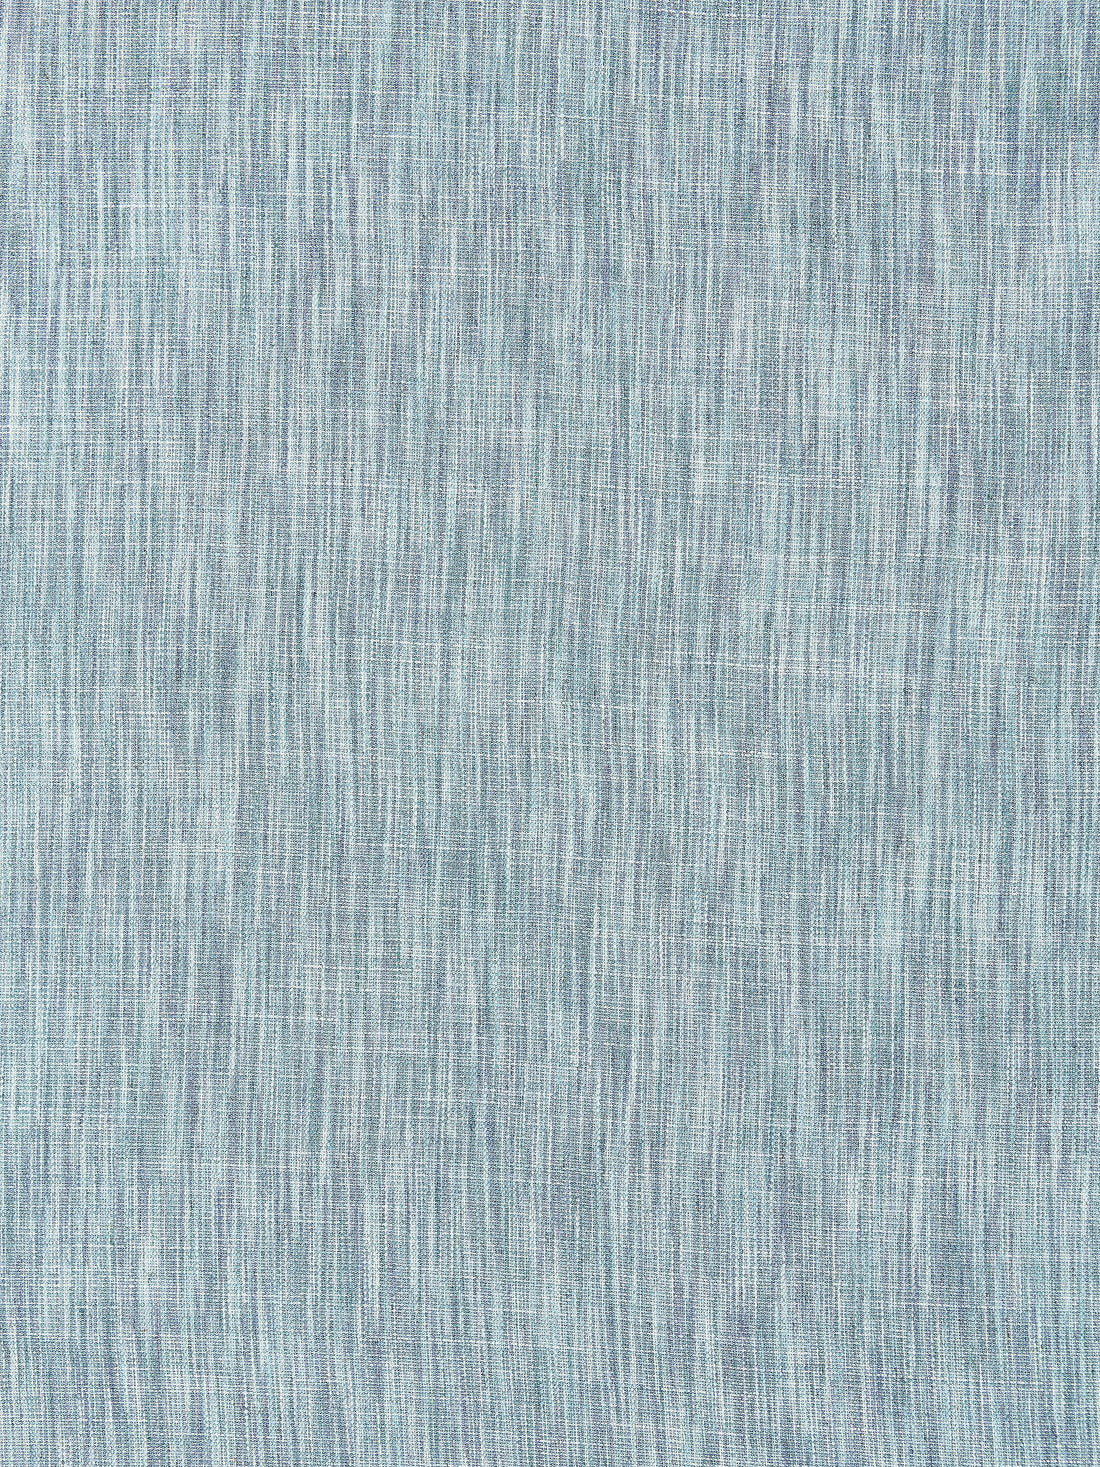 Sutton Strie Weave fabric in sky color - pattern number SC 000327095 - by Scalamandre in the Scalamandre Fabrics Book 1 collection